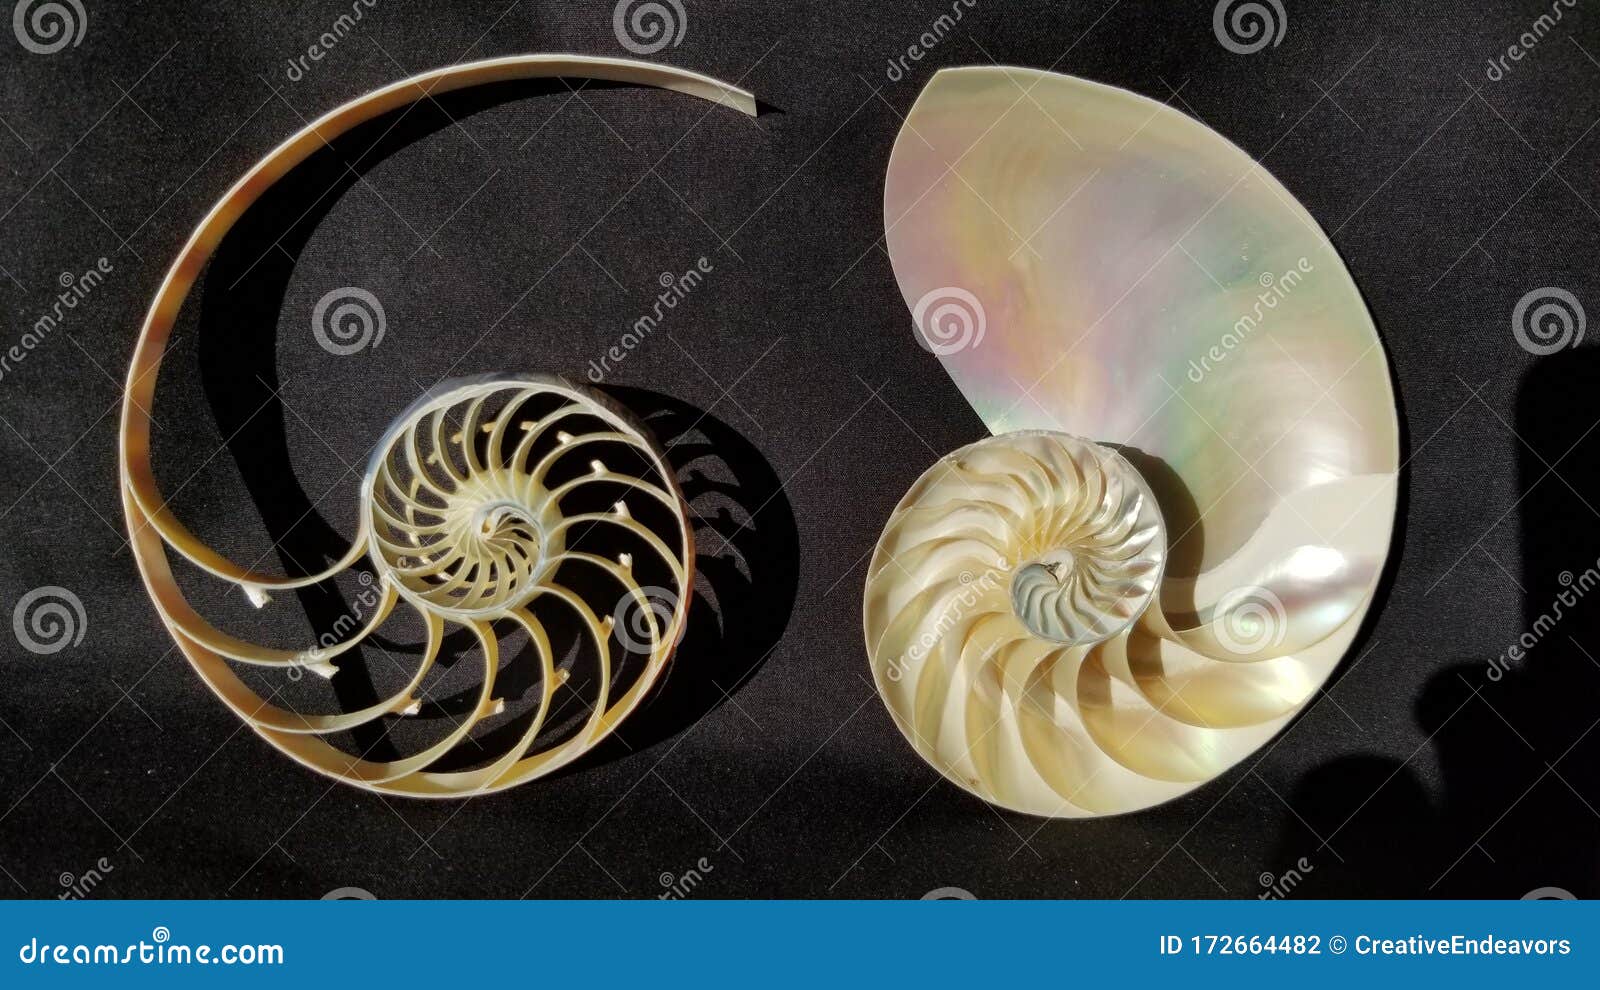 chambered nautilus shell sections  on black background